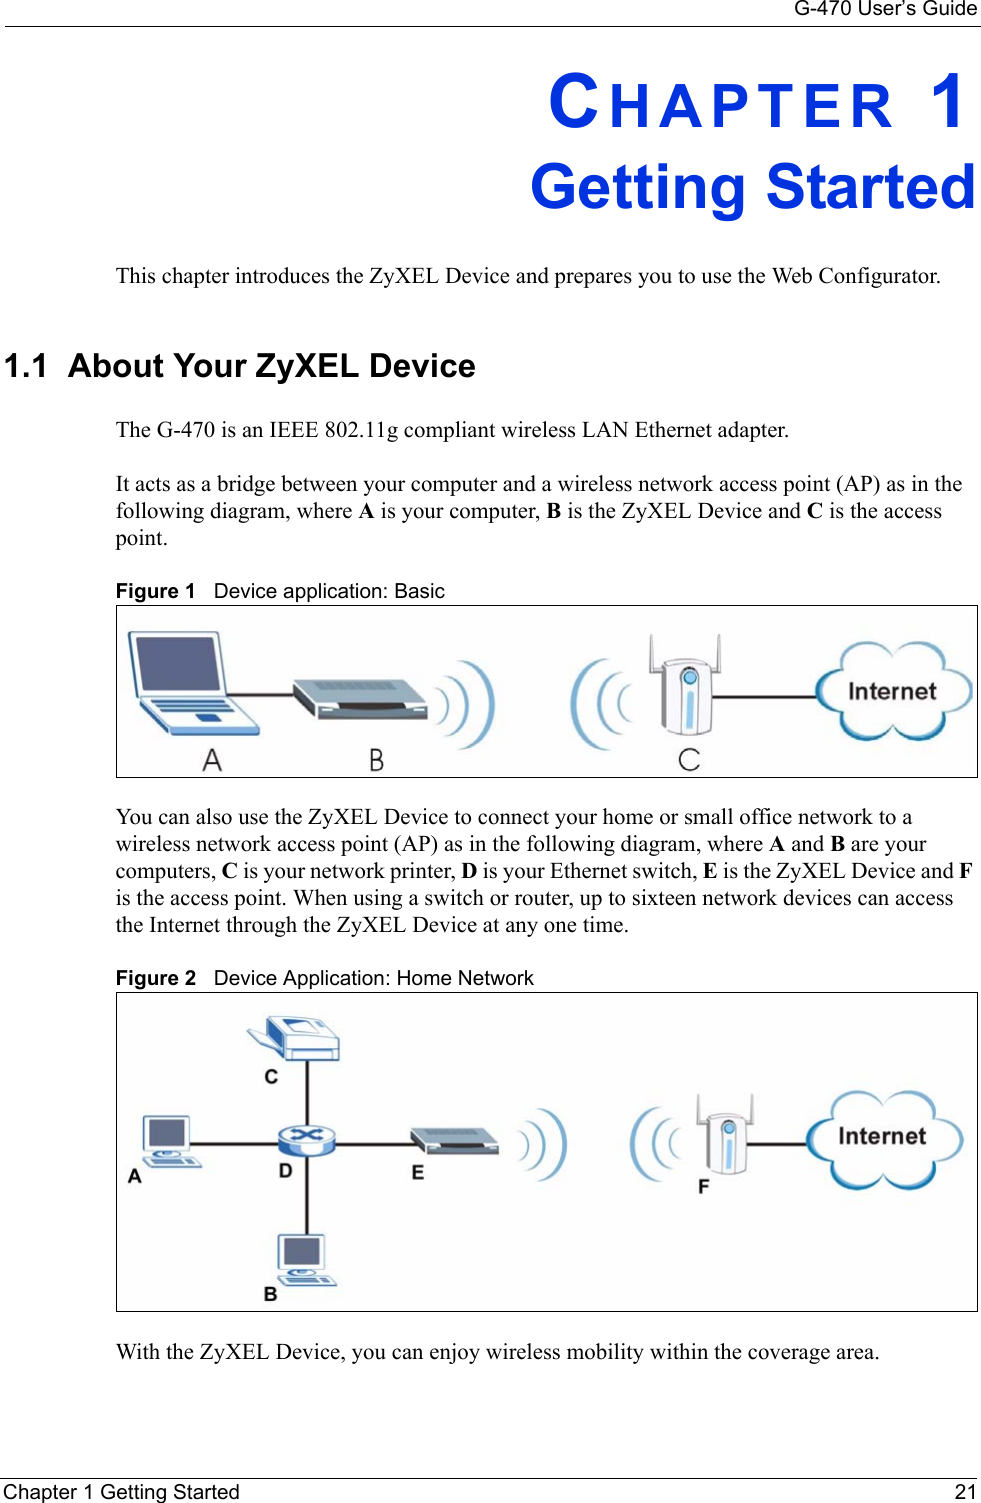 G-470 User’s GuideChapter 1 Getting Started 21CHAPTER 1Getting StartedThis chapter introduces the ZyXEL Device and prepares you to use the Web Configurator.1.1  About Your ZyXEL Device    The G-470 is an IEEE 802.11g compliant wireless LAN Ethernet adapter. It acts as a bridge between your computer and a wireless network access point (AP) as in the following diagram, where A is your computer, B is the ZyXEL Device and C is the access point.Figure 1   Device application: BasicYou can also use the ZyXEL Device to connect your home or small office network to a wireless network access point (AP) as in the following diagram, where A and B are your computers, C is your network printer, D is your Ethernet switch, E is the ZyXEL Device and F is the access point. When using a switch or router, up to sixteen network devices can access the Internet through the ZyXEL Device at any one time.Figure 2   Device Application: Home NetworkWith the ZyXEL Device, you can enjoy wireless mobility within the coverage area.